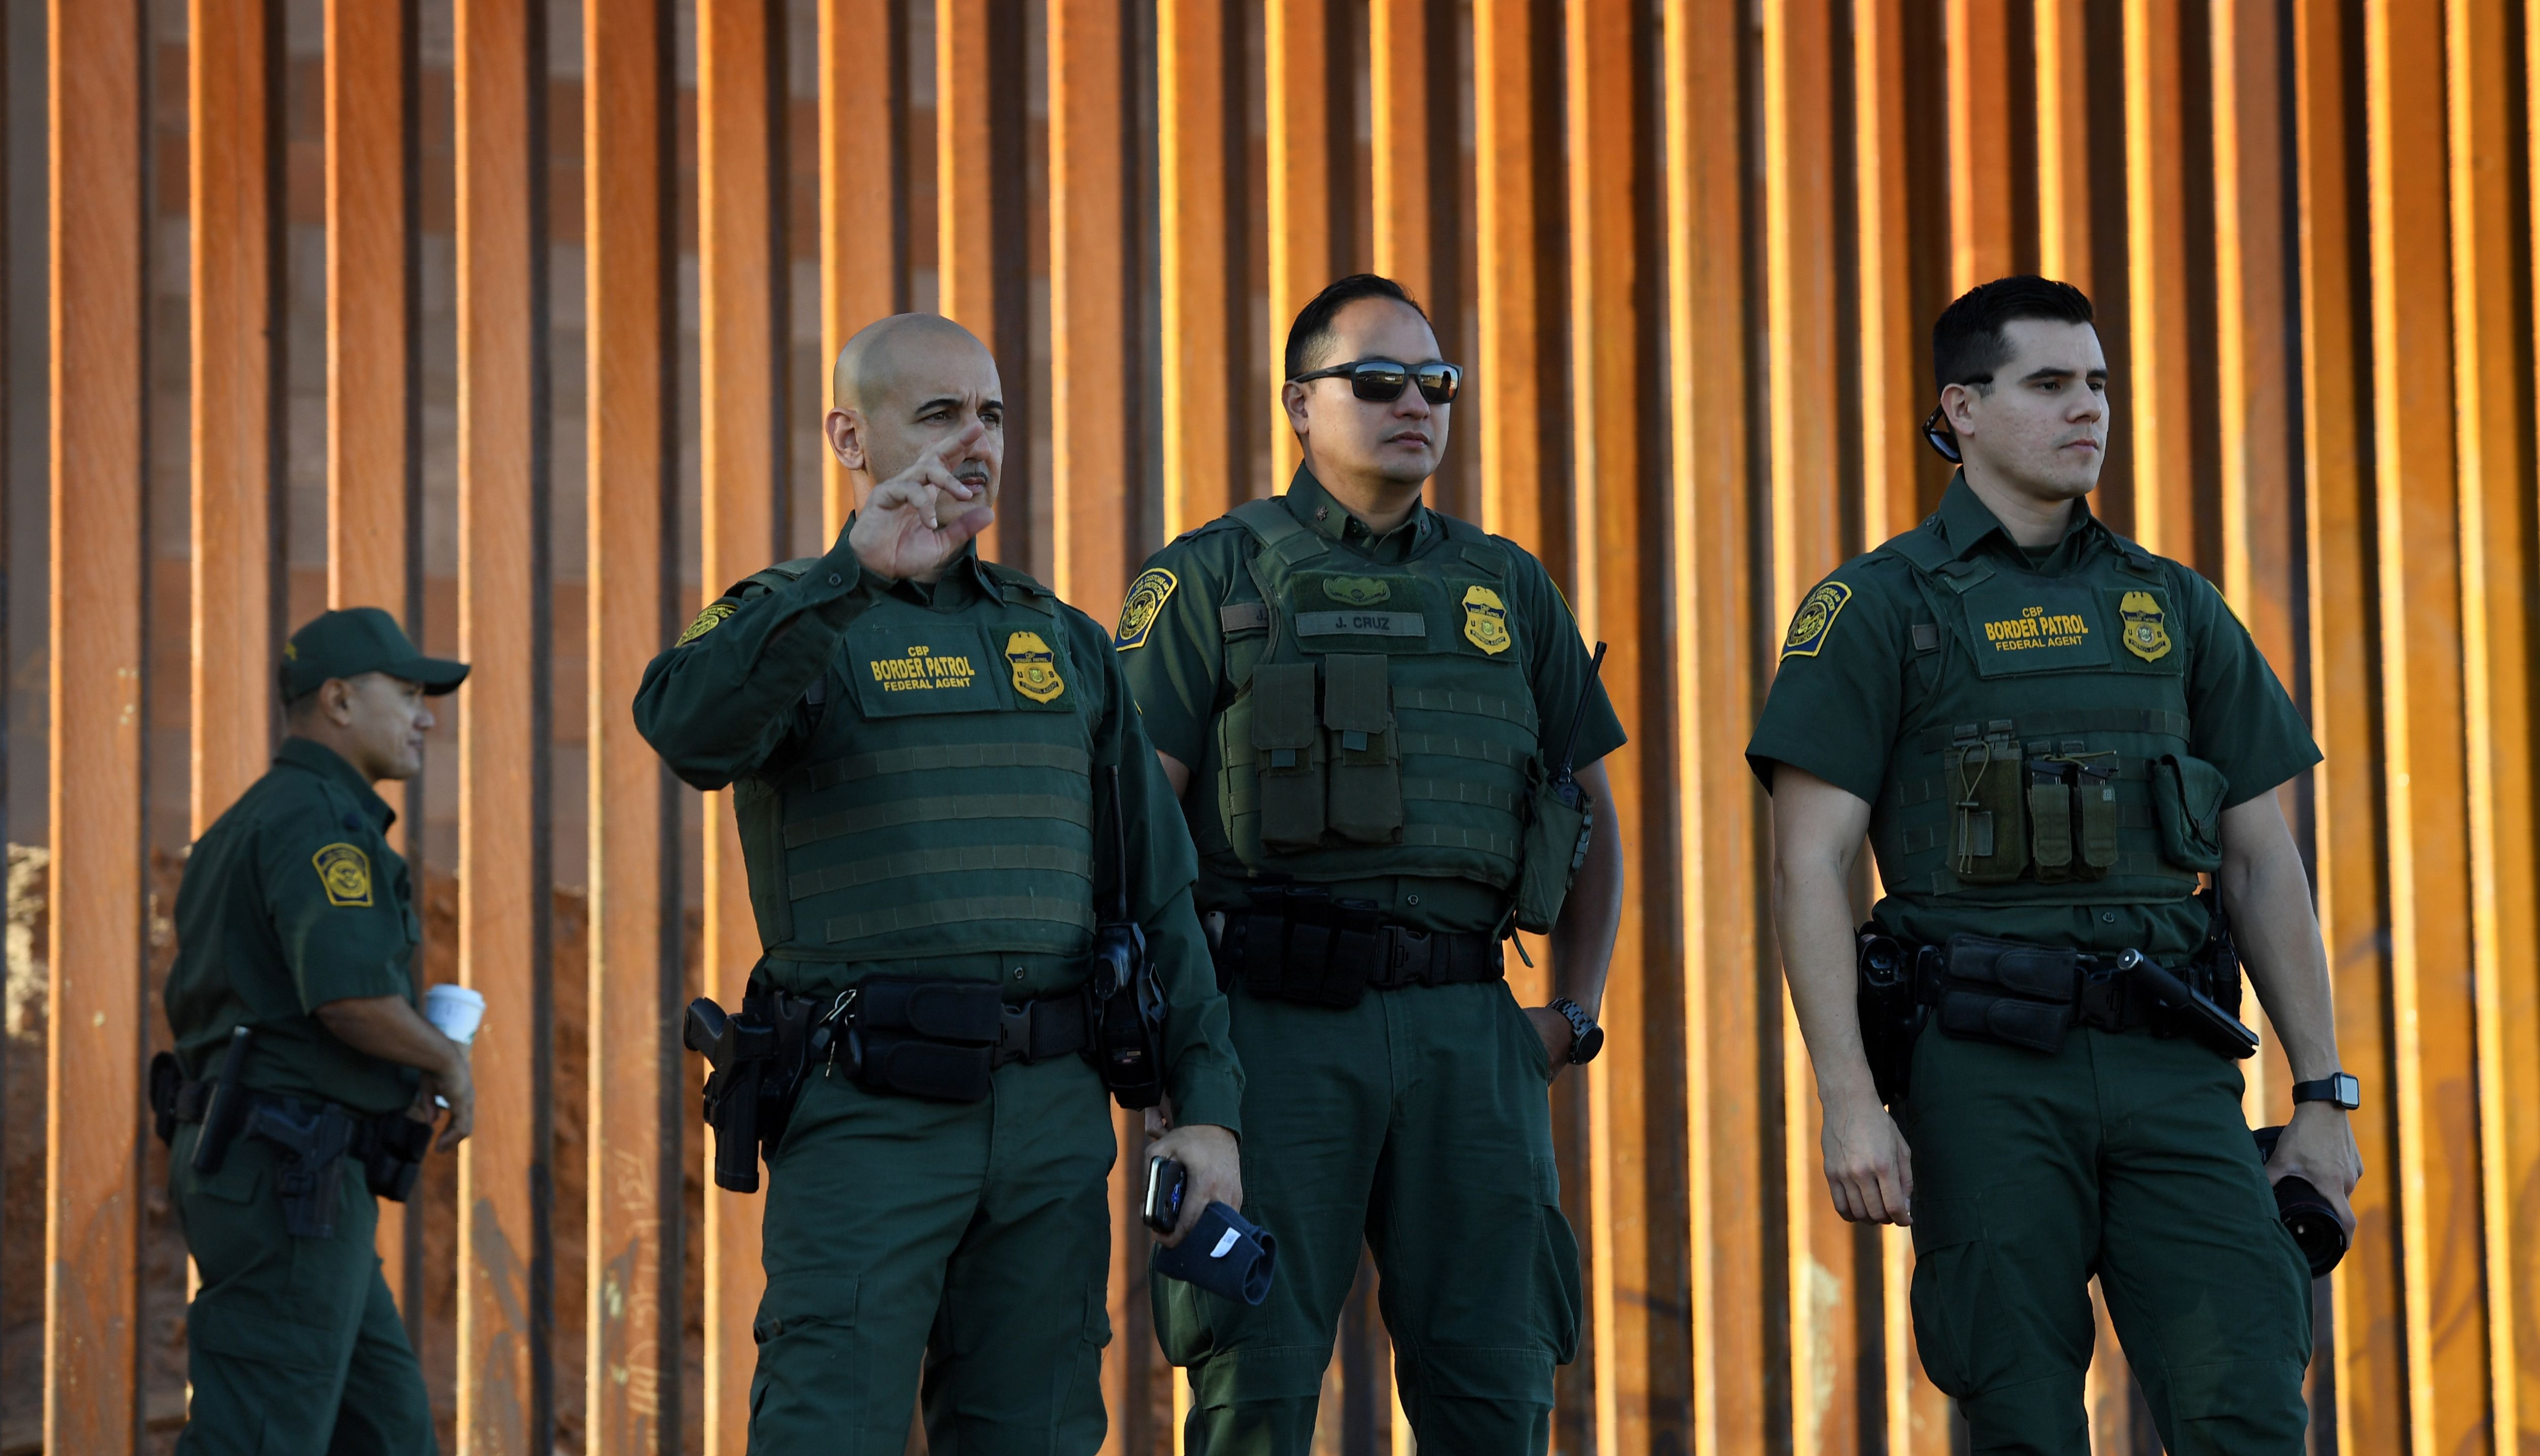 Border Patrol officers patrol before the US Secretary of Homeland Security inaugurates the first completed section of the 30-foot border wall in the El Centro Sector, at the US-Mexico border in Calexico, California on October 26, 2018. (Photo by Mark RALSTON / AFP)